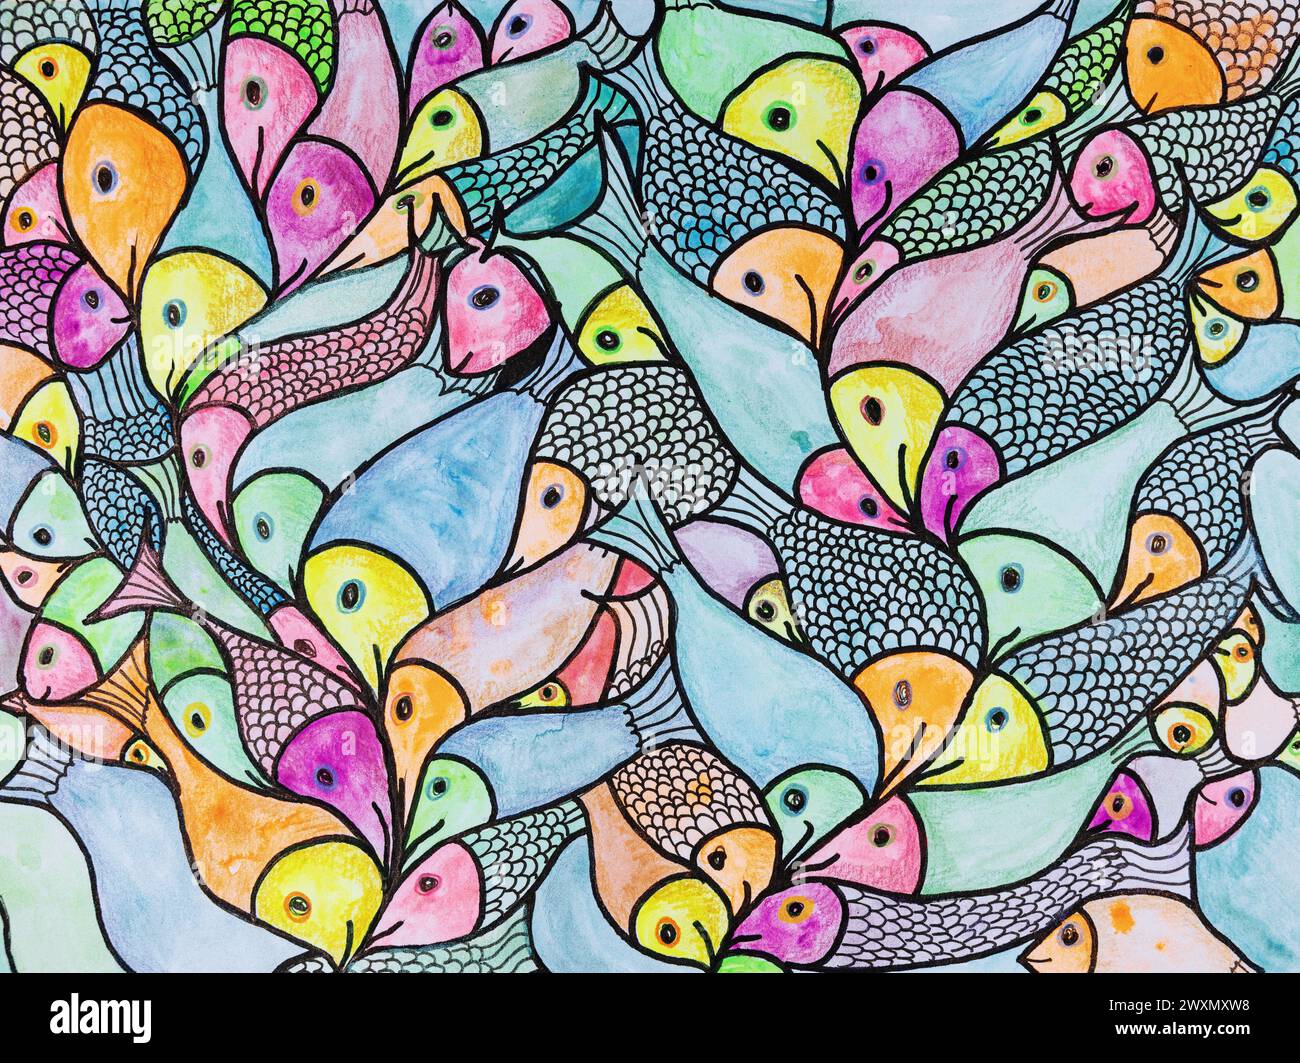 Composition of fish in neon colors. The dabbing technique near the edges gives a soft focus effect due to the altered surface roughness of the paper. Stock Photo